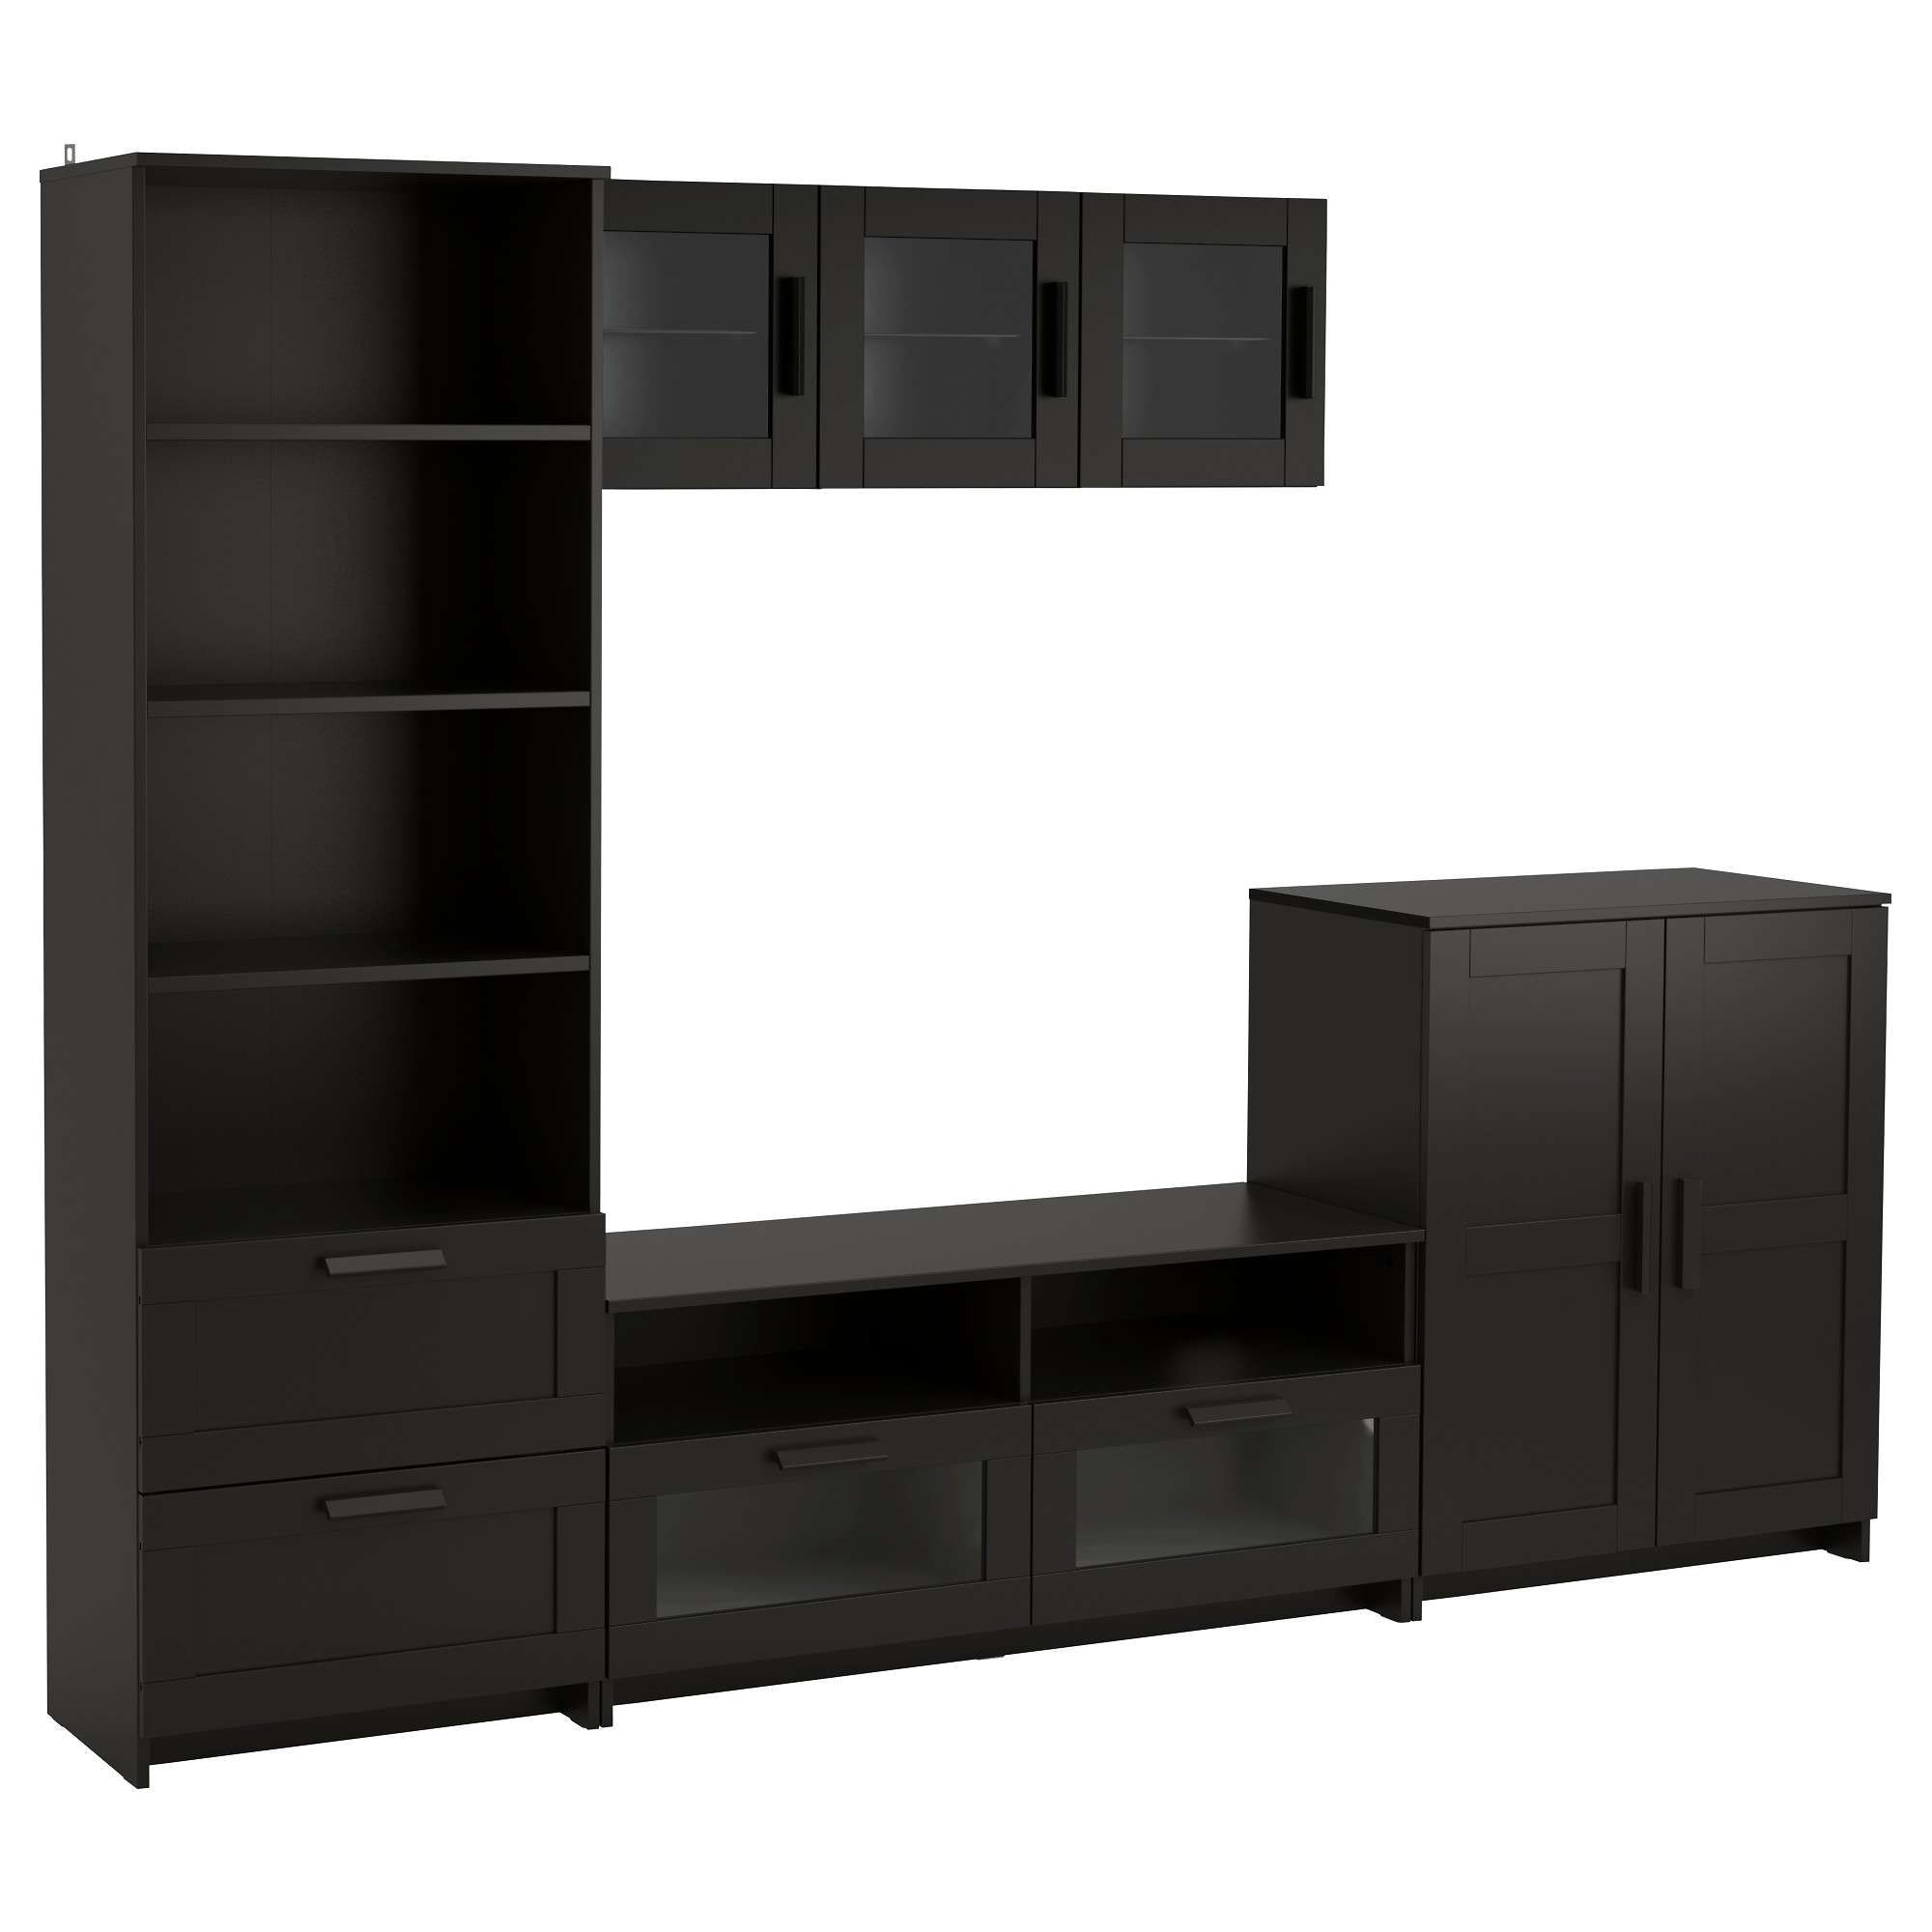 Top 20 Of Wall Mounted Tv Cabinets Ikea For Wall Mounted Under Tv Cabinet (View 13 of 15)